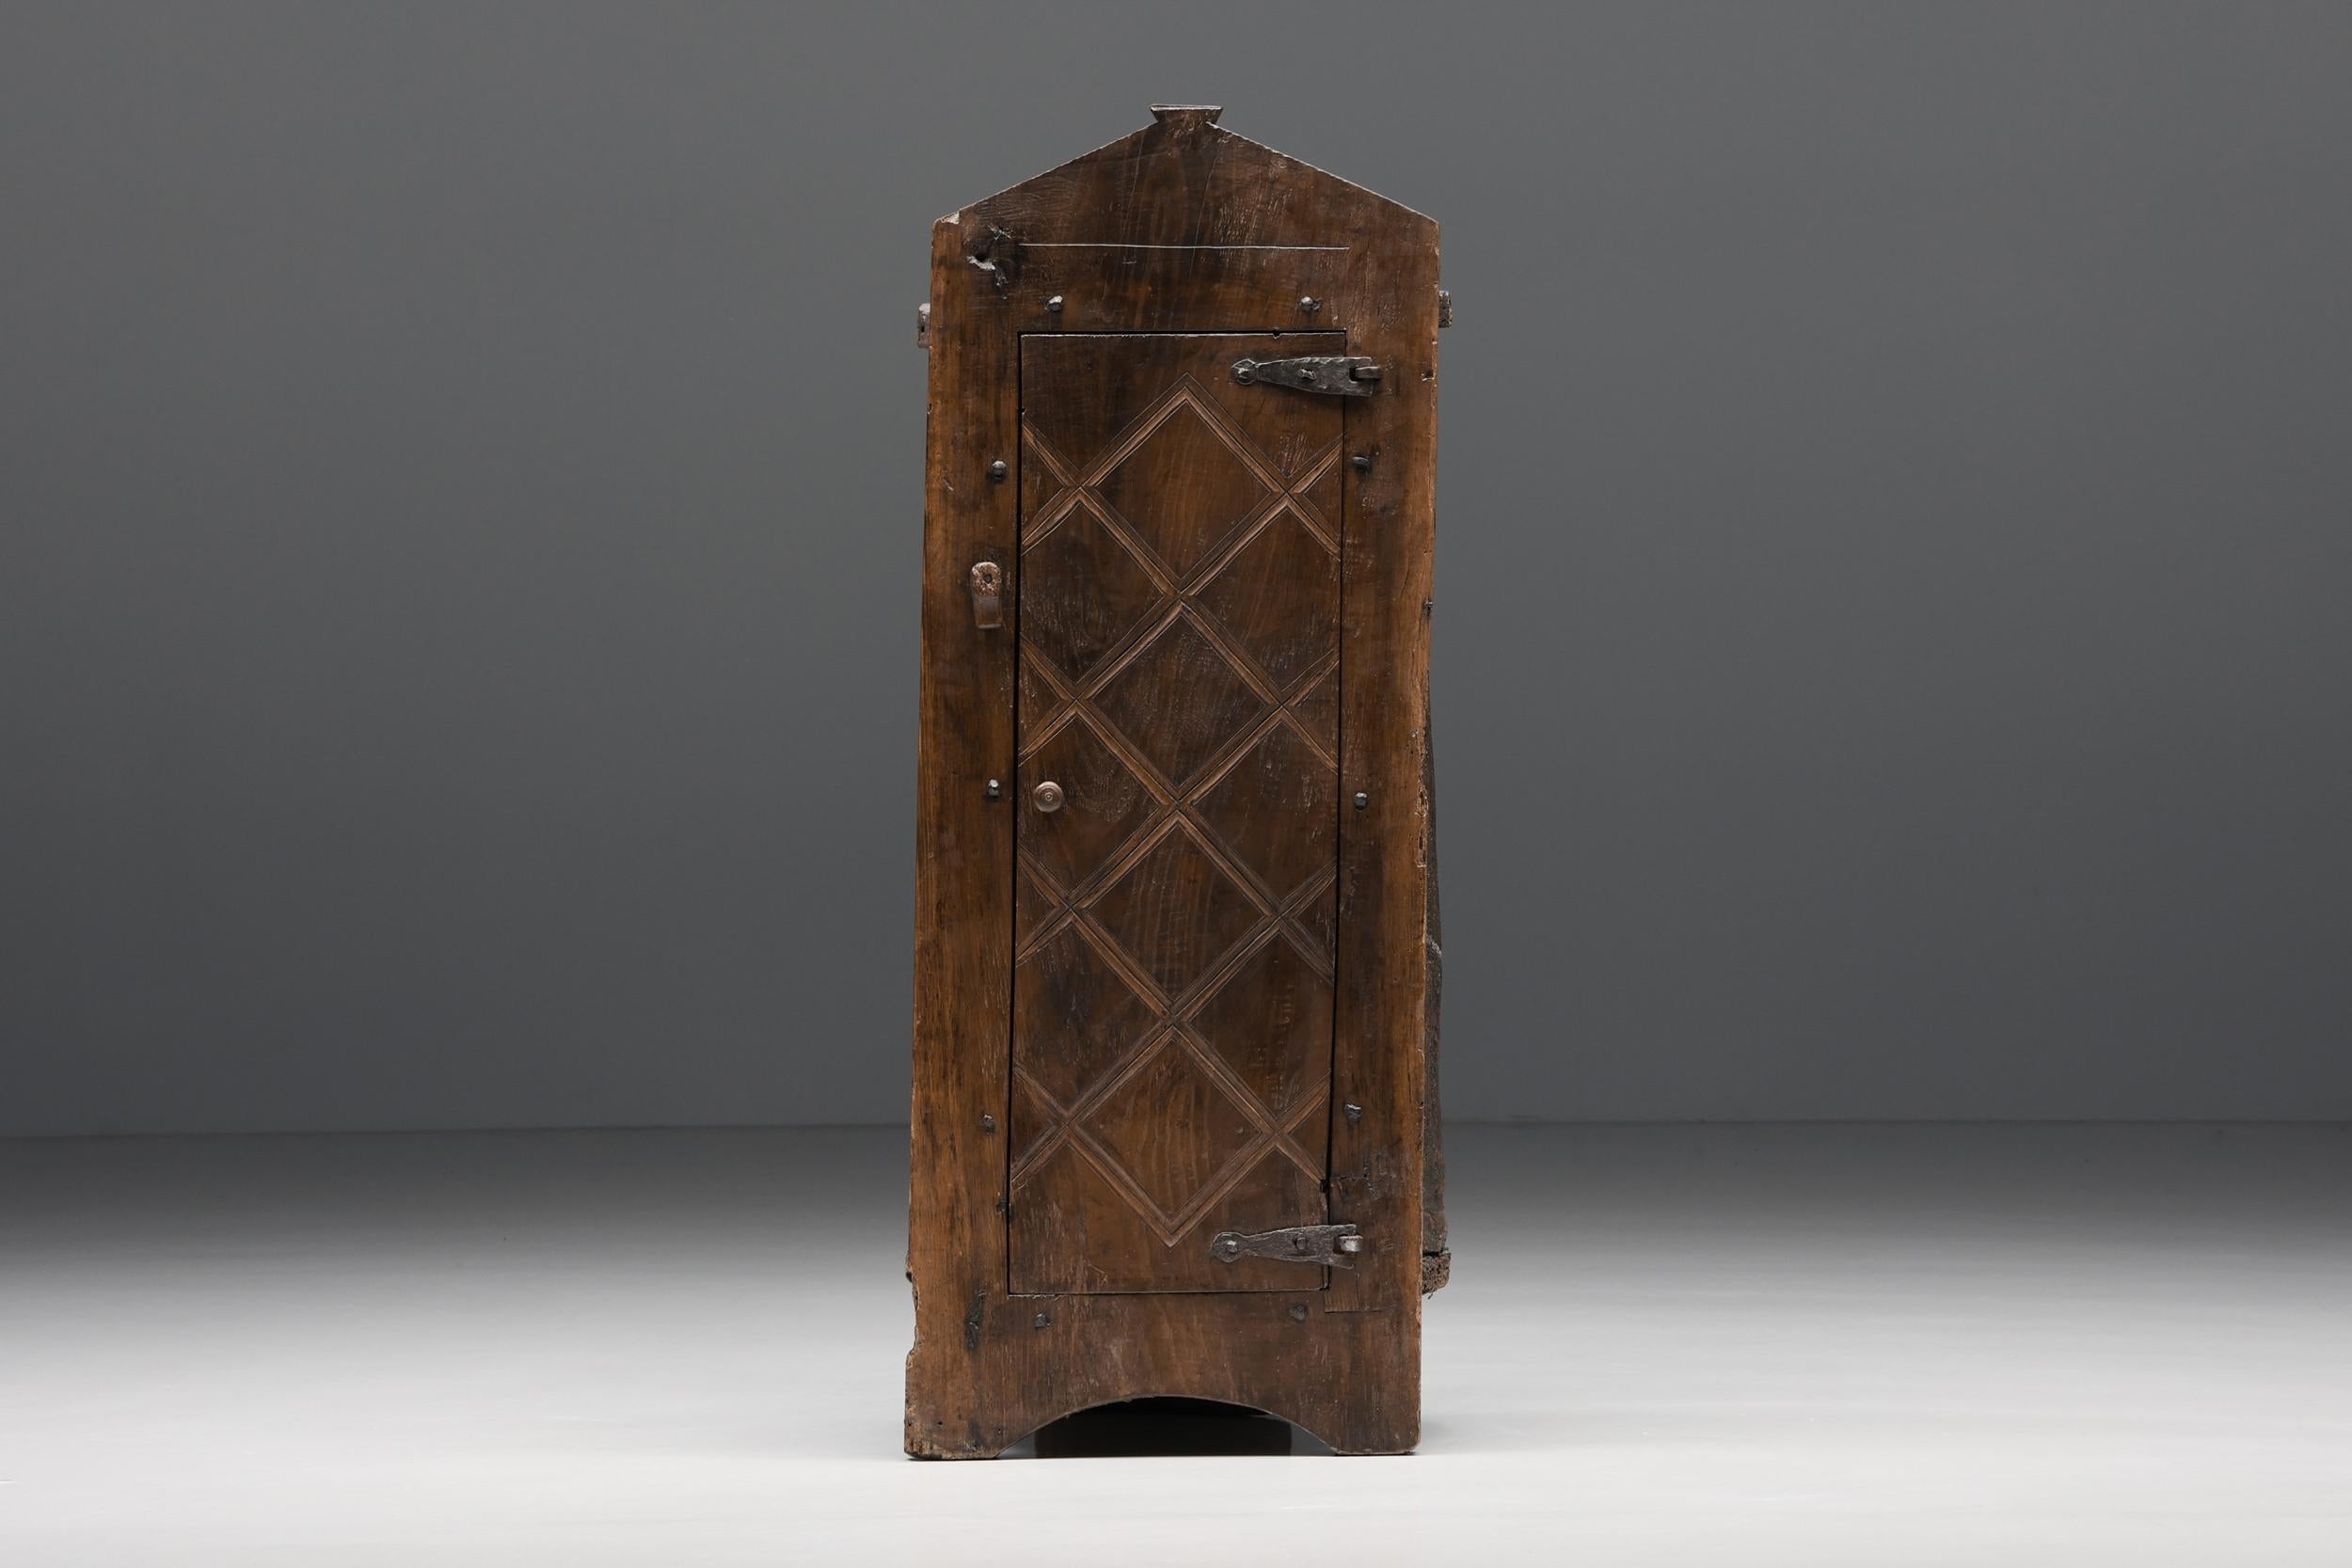 Rustic; Robust; Wabi Sabi; Travail Populaire; Folk Art; Travail Art Populaire; Cabinet; Storage Piece; Storage Unit; Wood; France; Monoxyle; Hand Carved; Organic; Alpine; Luxury Chalet Style;

French 19th-century travail populaire, folk art,